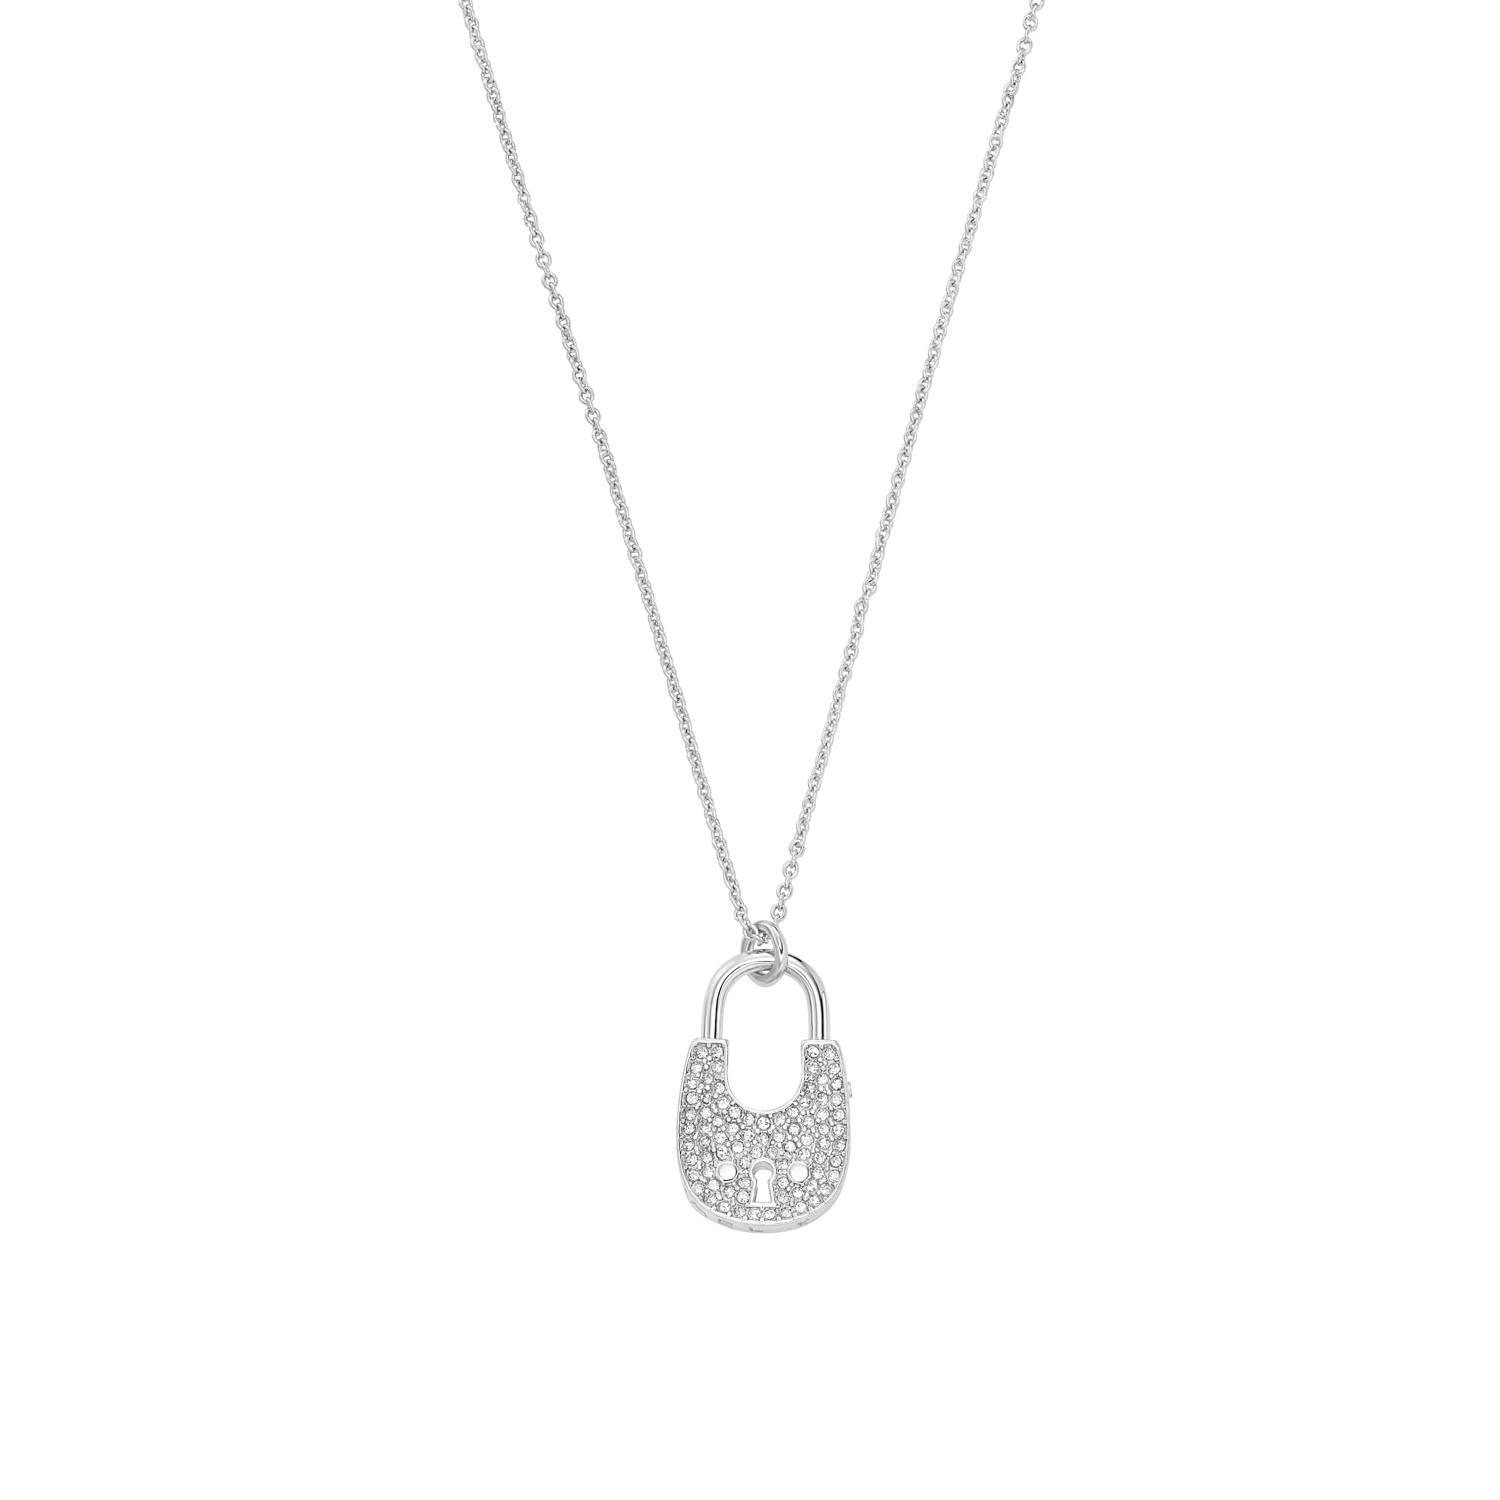 Michael Kors Women's Silver Tone Pendant Necklace With Crystal Accents